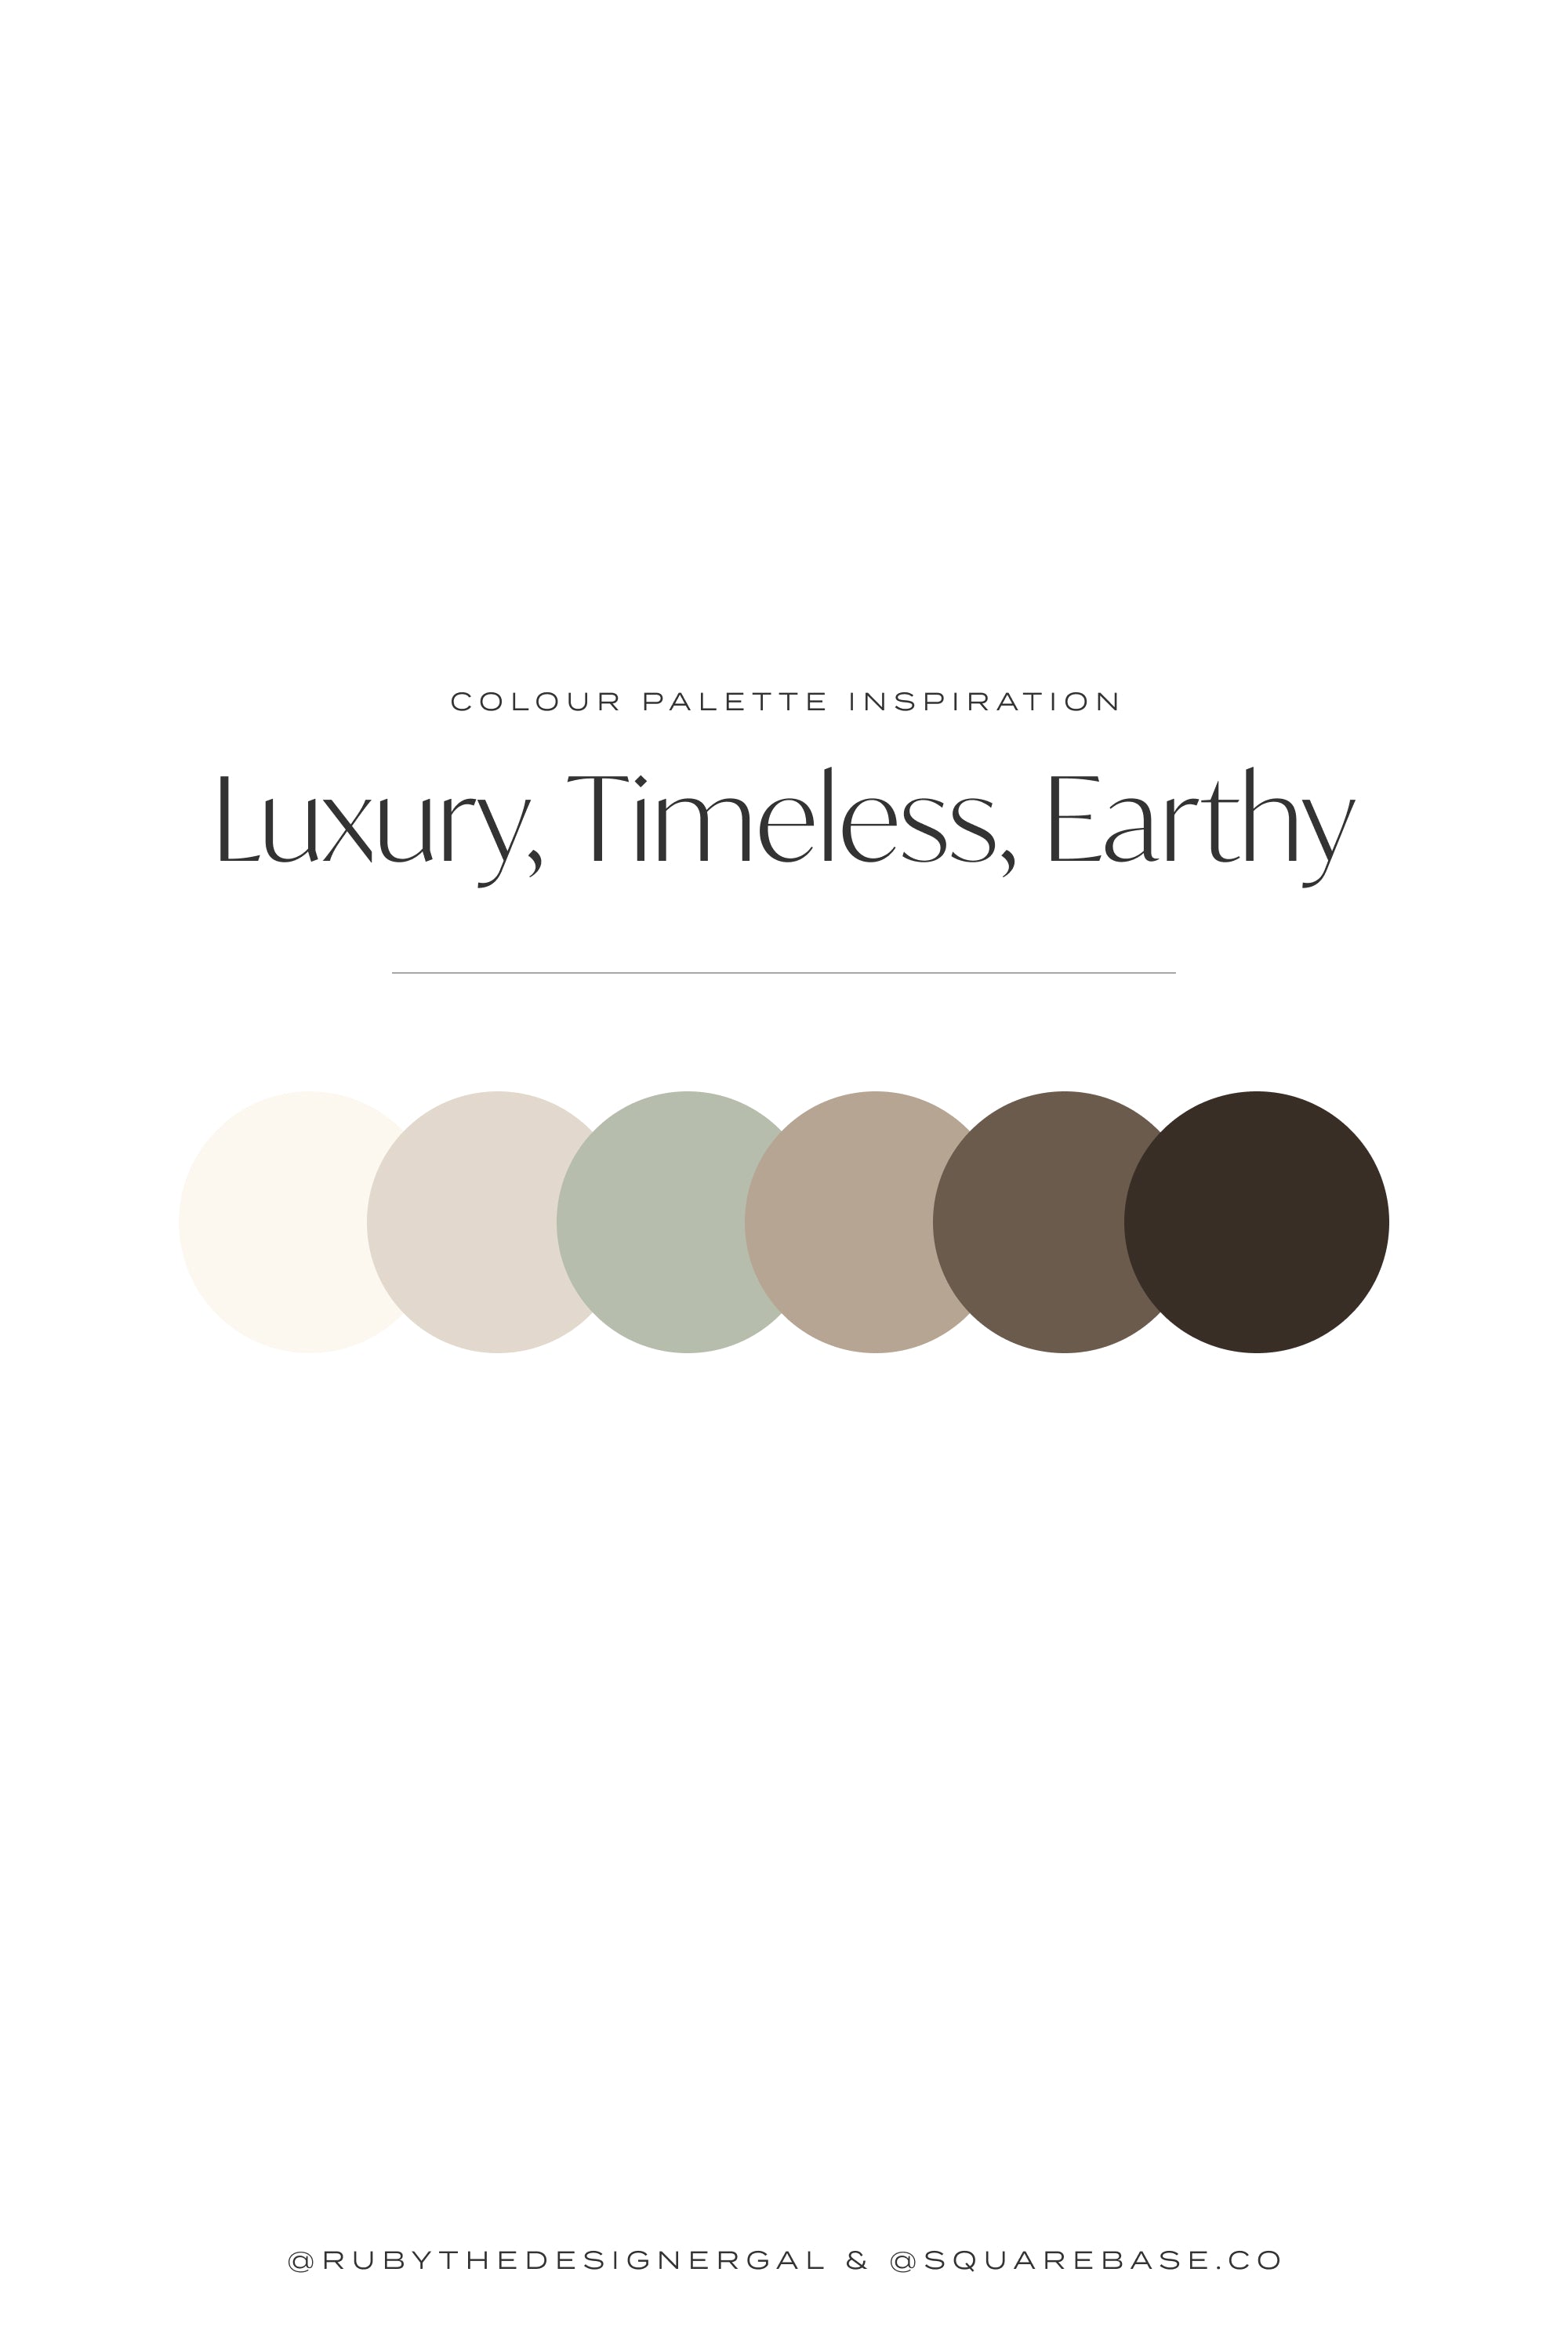 Luxury, Timeless, Earthy - Luxury Colour Palettes for Your Brand